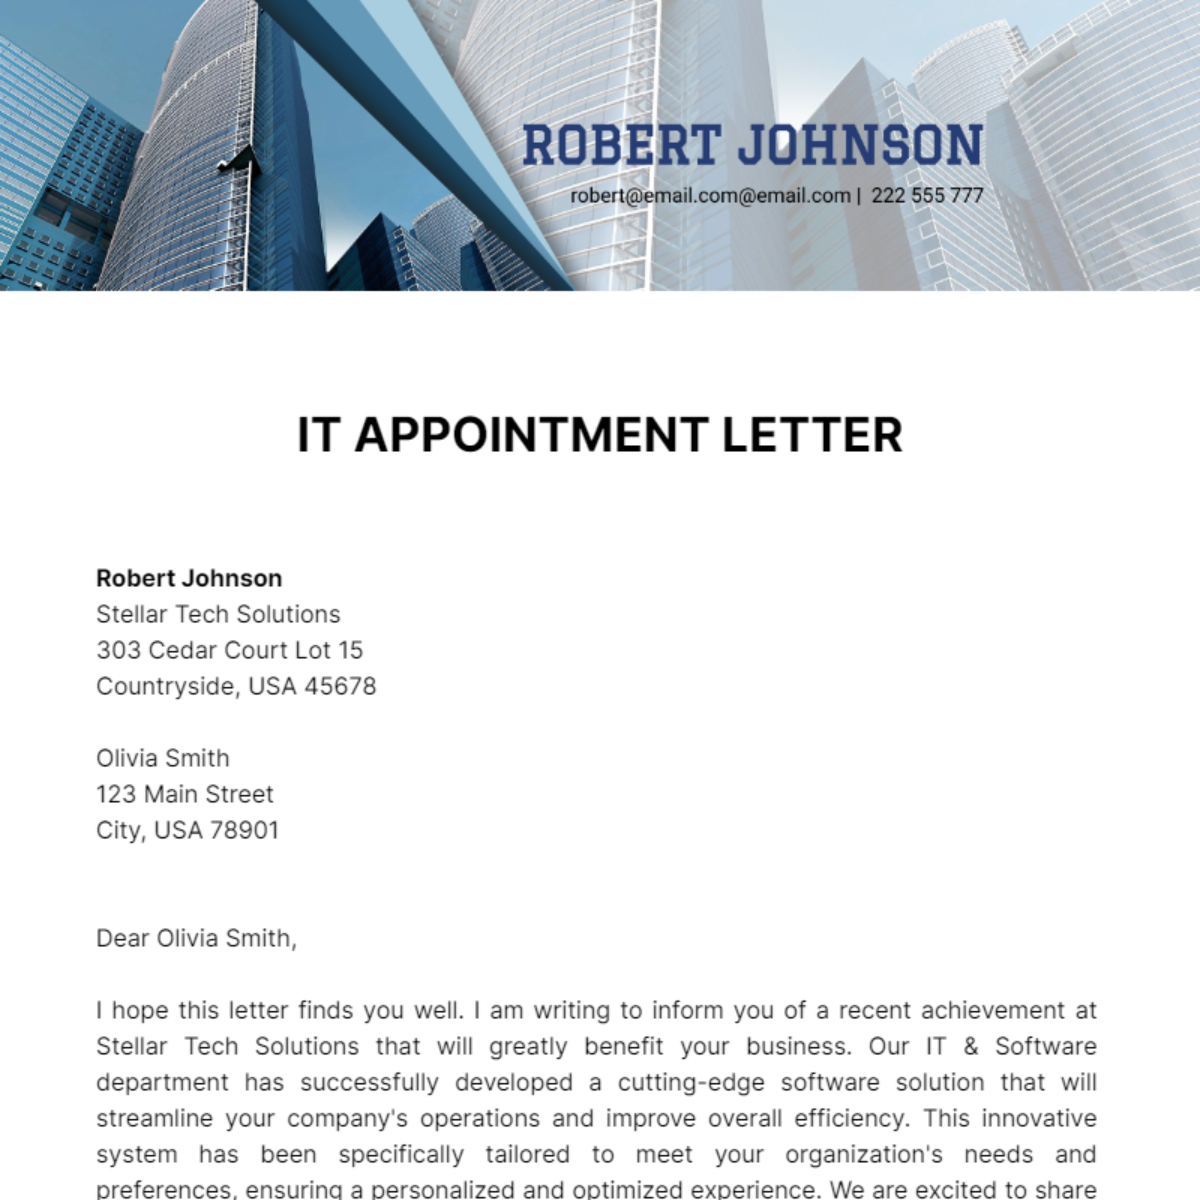 IT Appointment Letter Template